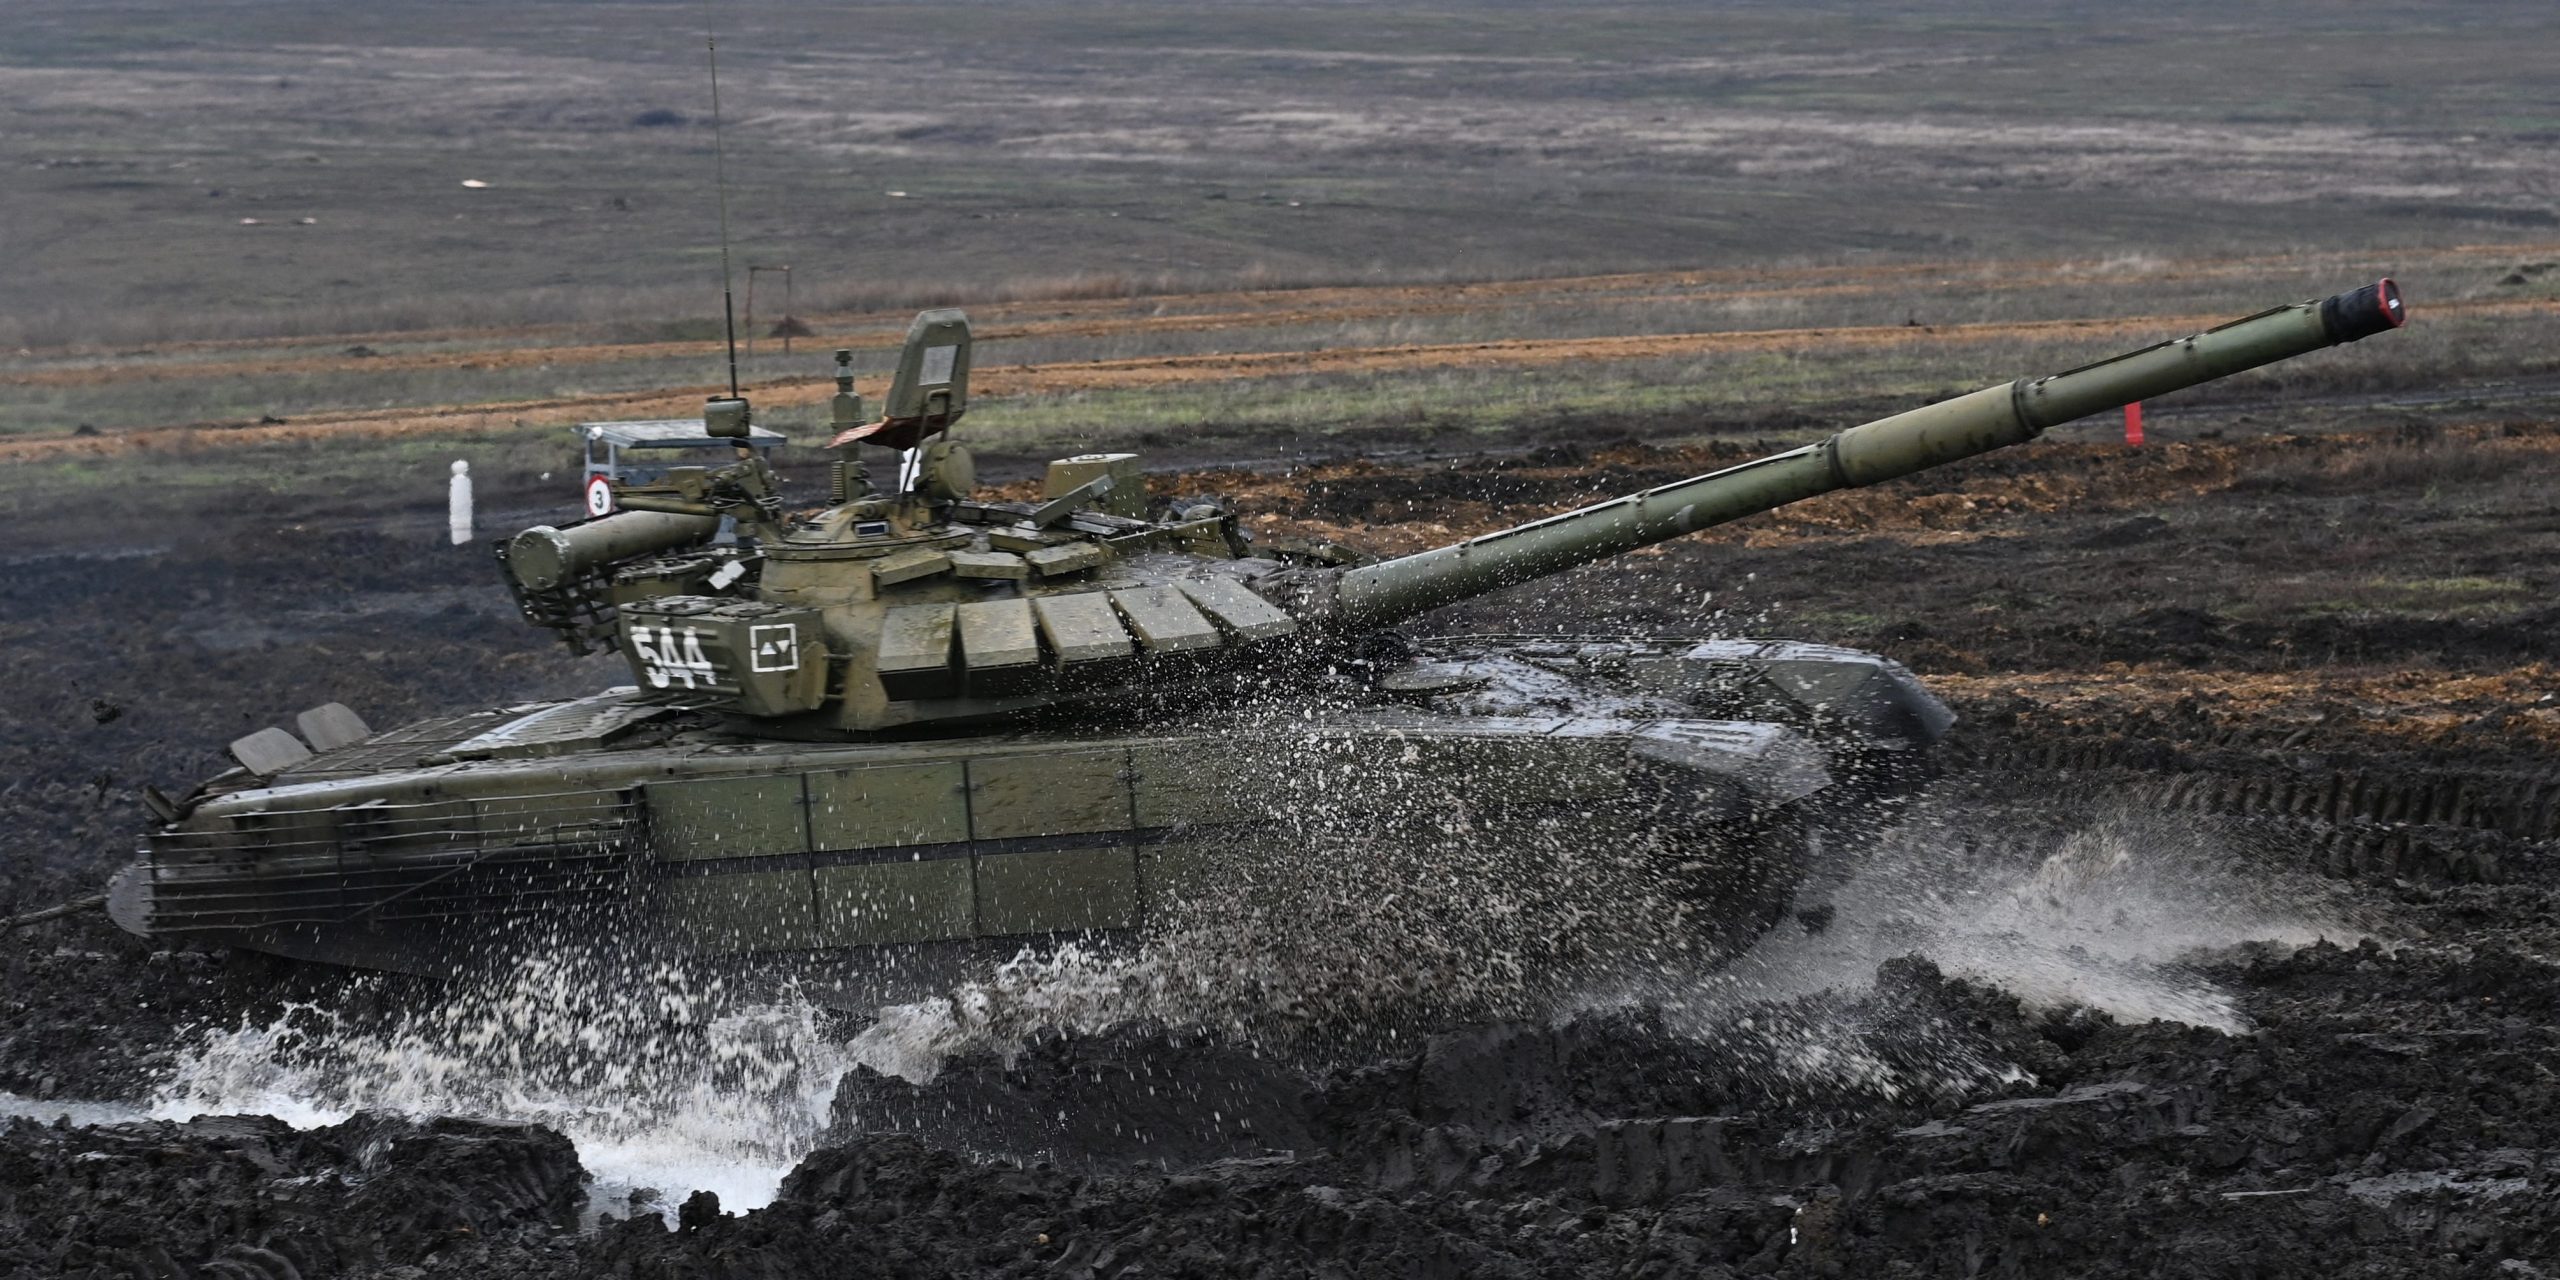 A Russian T-72B3 main battle tank drives during military drills at the Kadamovsky range in the Rostov region, Russia December 20, 2021